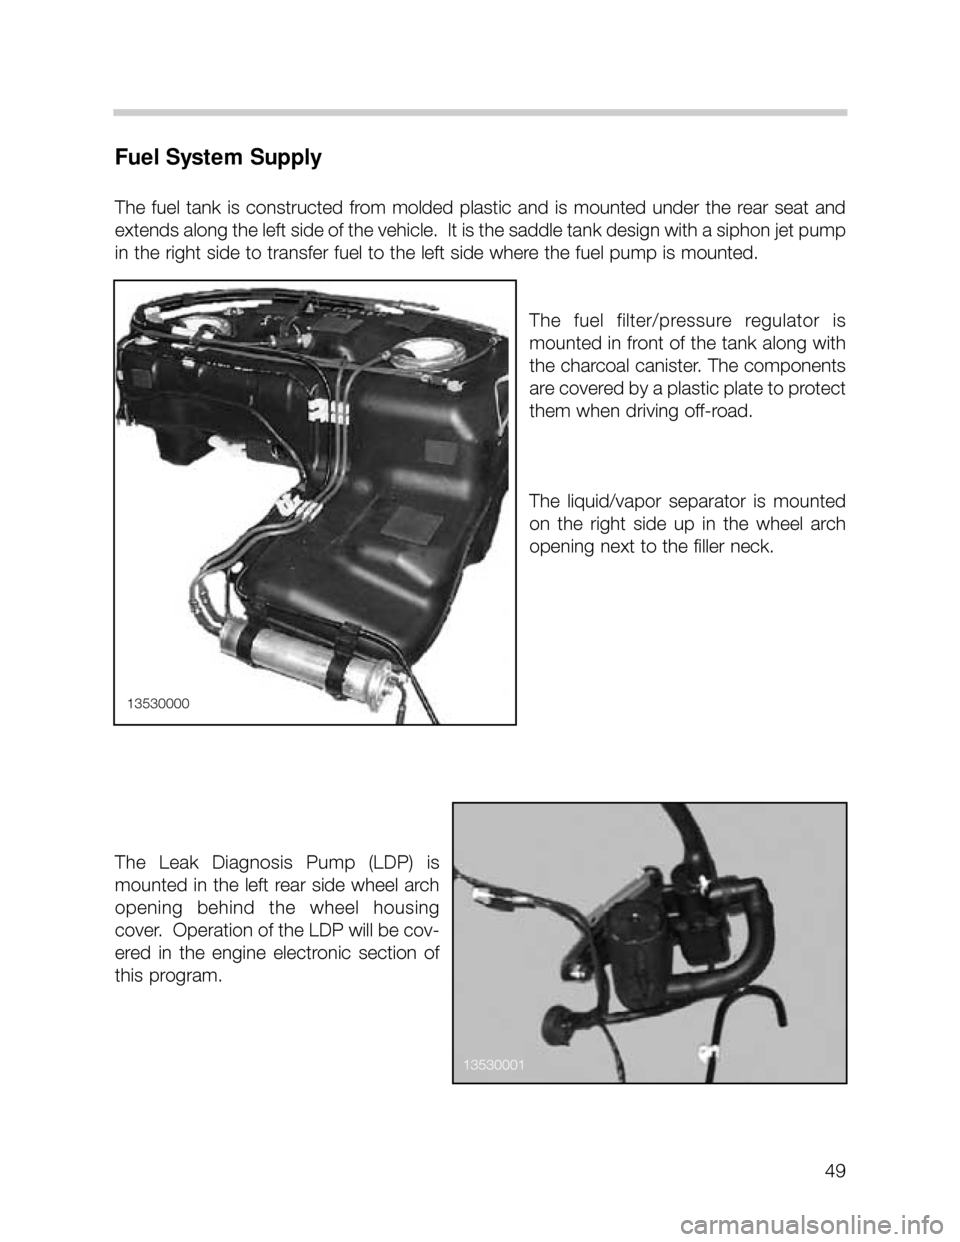 BMW X5 1999 E53 Workshop Manual 49
Fuel System Supply
The  fuel  tank  is  constructed  from  molded  plastic  and  is  mounted  under  the  rear  seat  and
extends along the left side of the vehicle.  It is the saddle tank design w